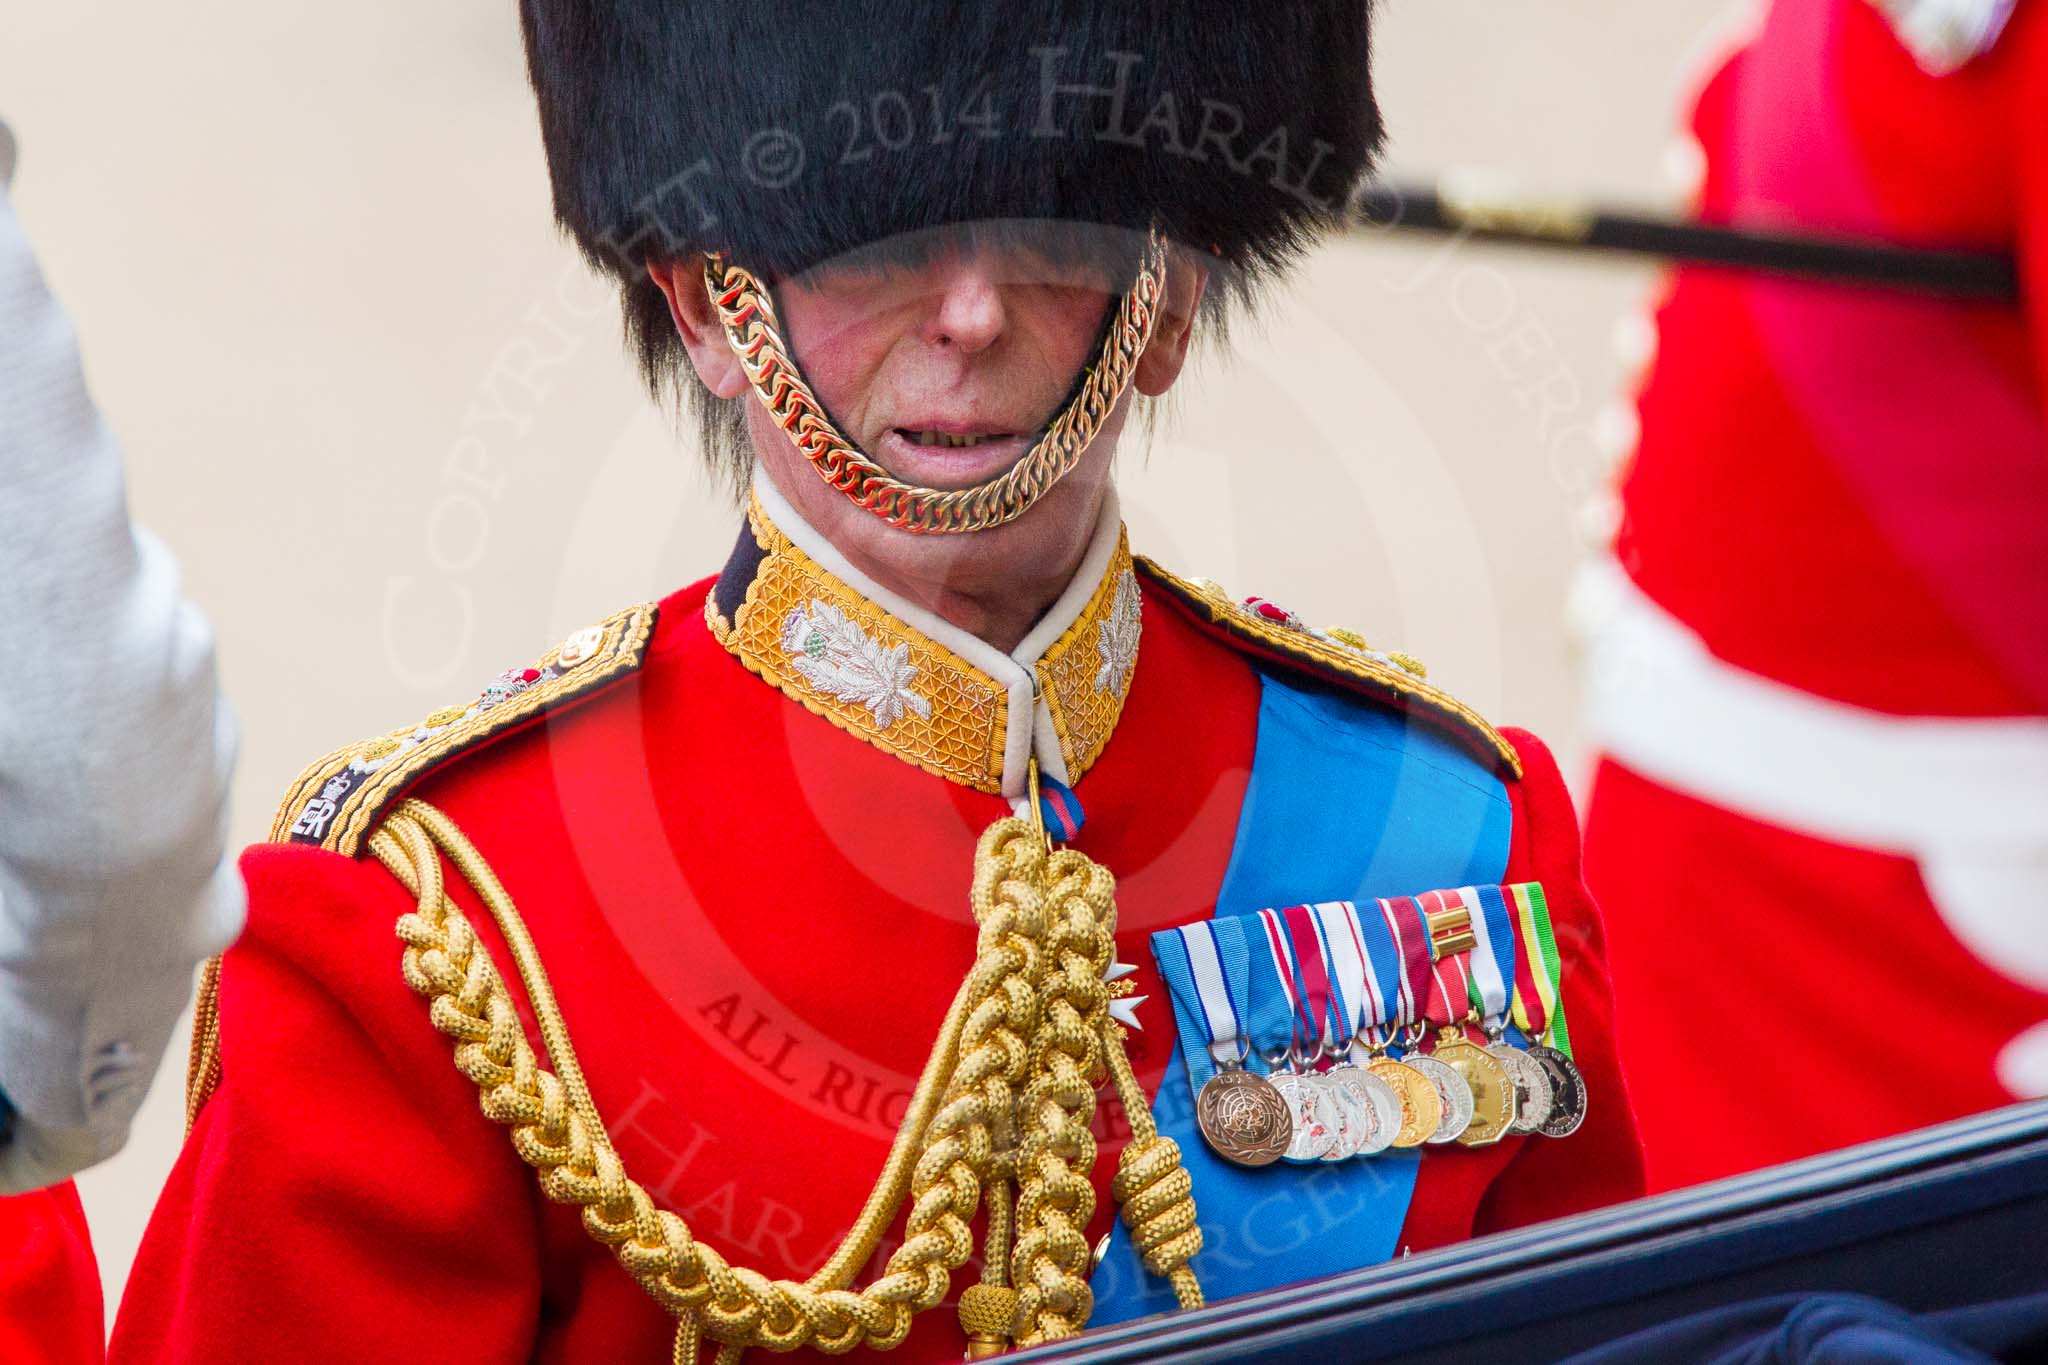 Trooping the Colour 2014.
Horse Guards Parade, Westminster,
London SW1A,

United Kingdom,
on 14 June 2014 at 10:51, image #293